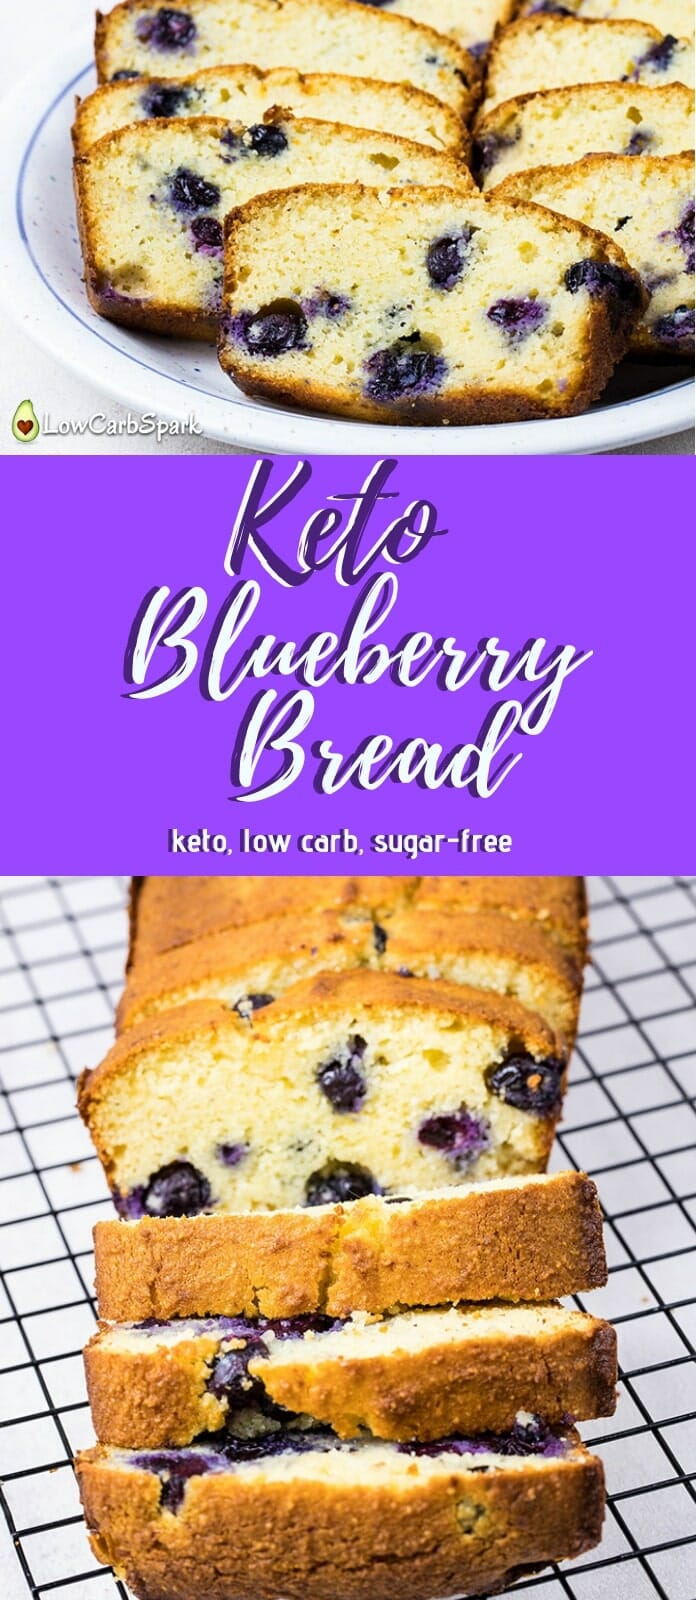 Easy Keto Blueberry Bread - Low-Carb Recipe